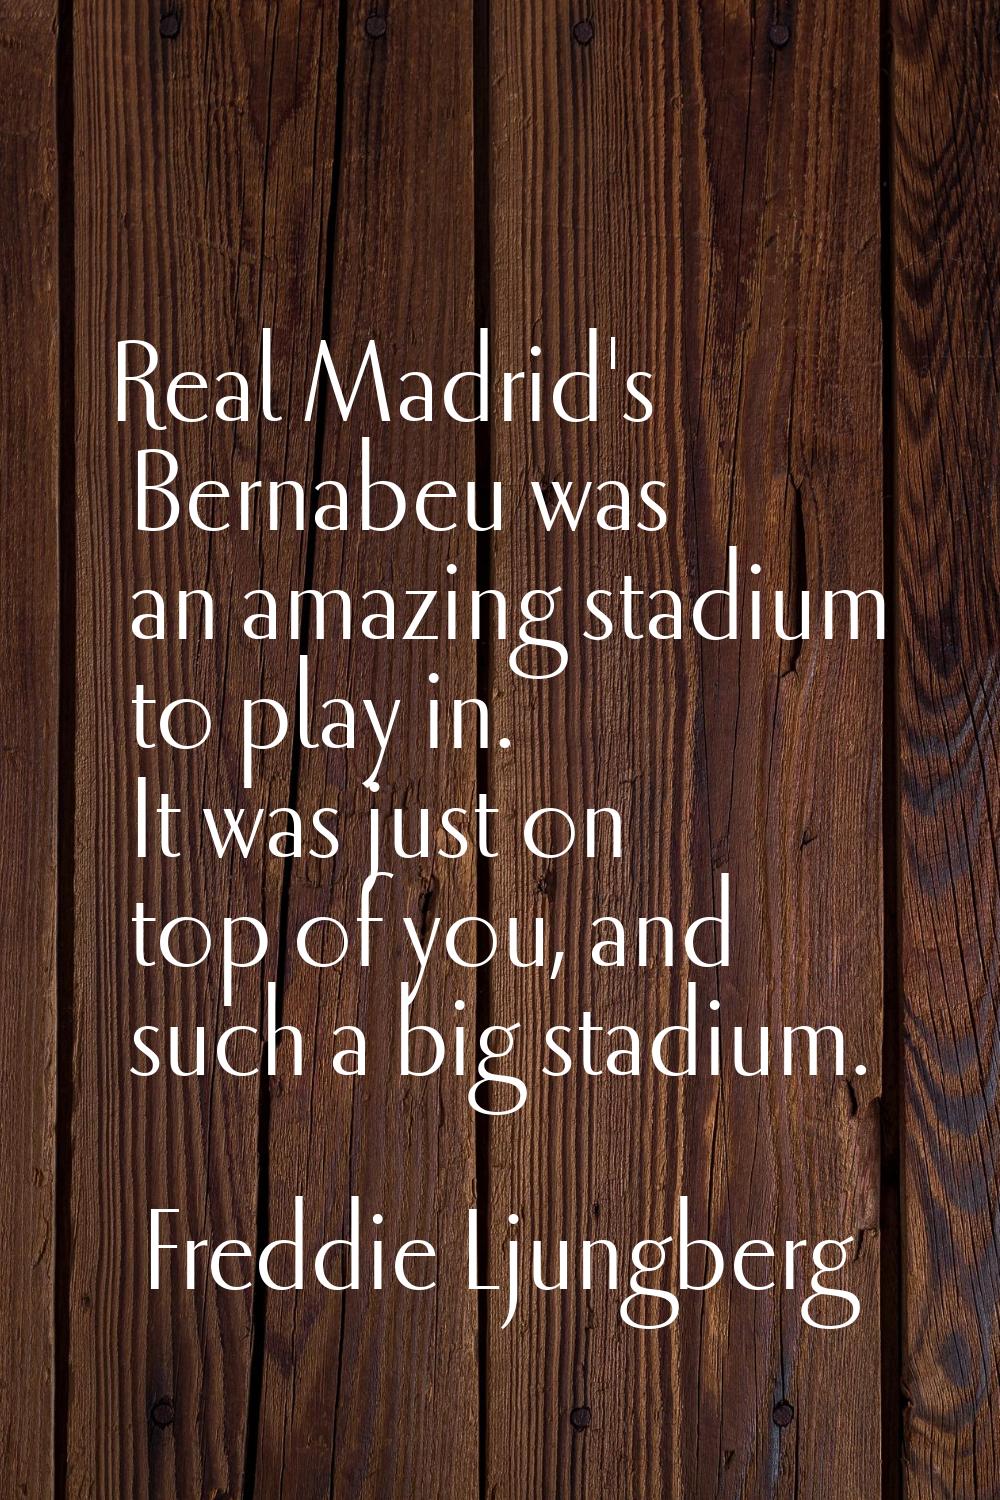 Real Madrid's Bernabeu was an amazing stadium to play in. It was just on top of you, and such a big